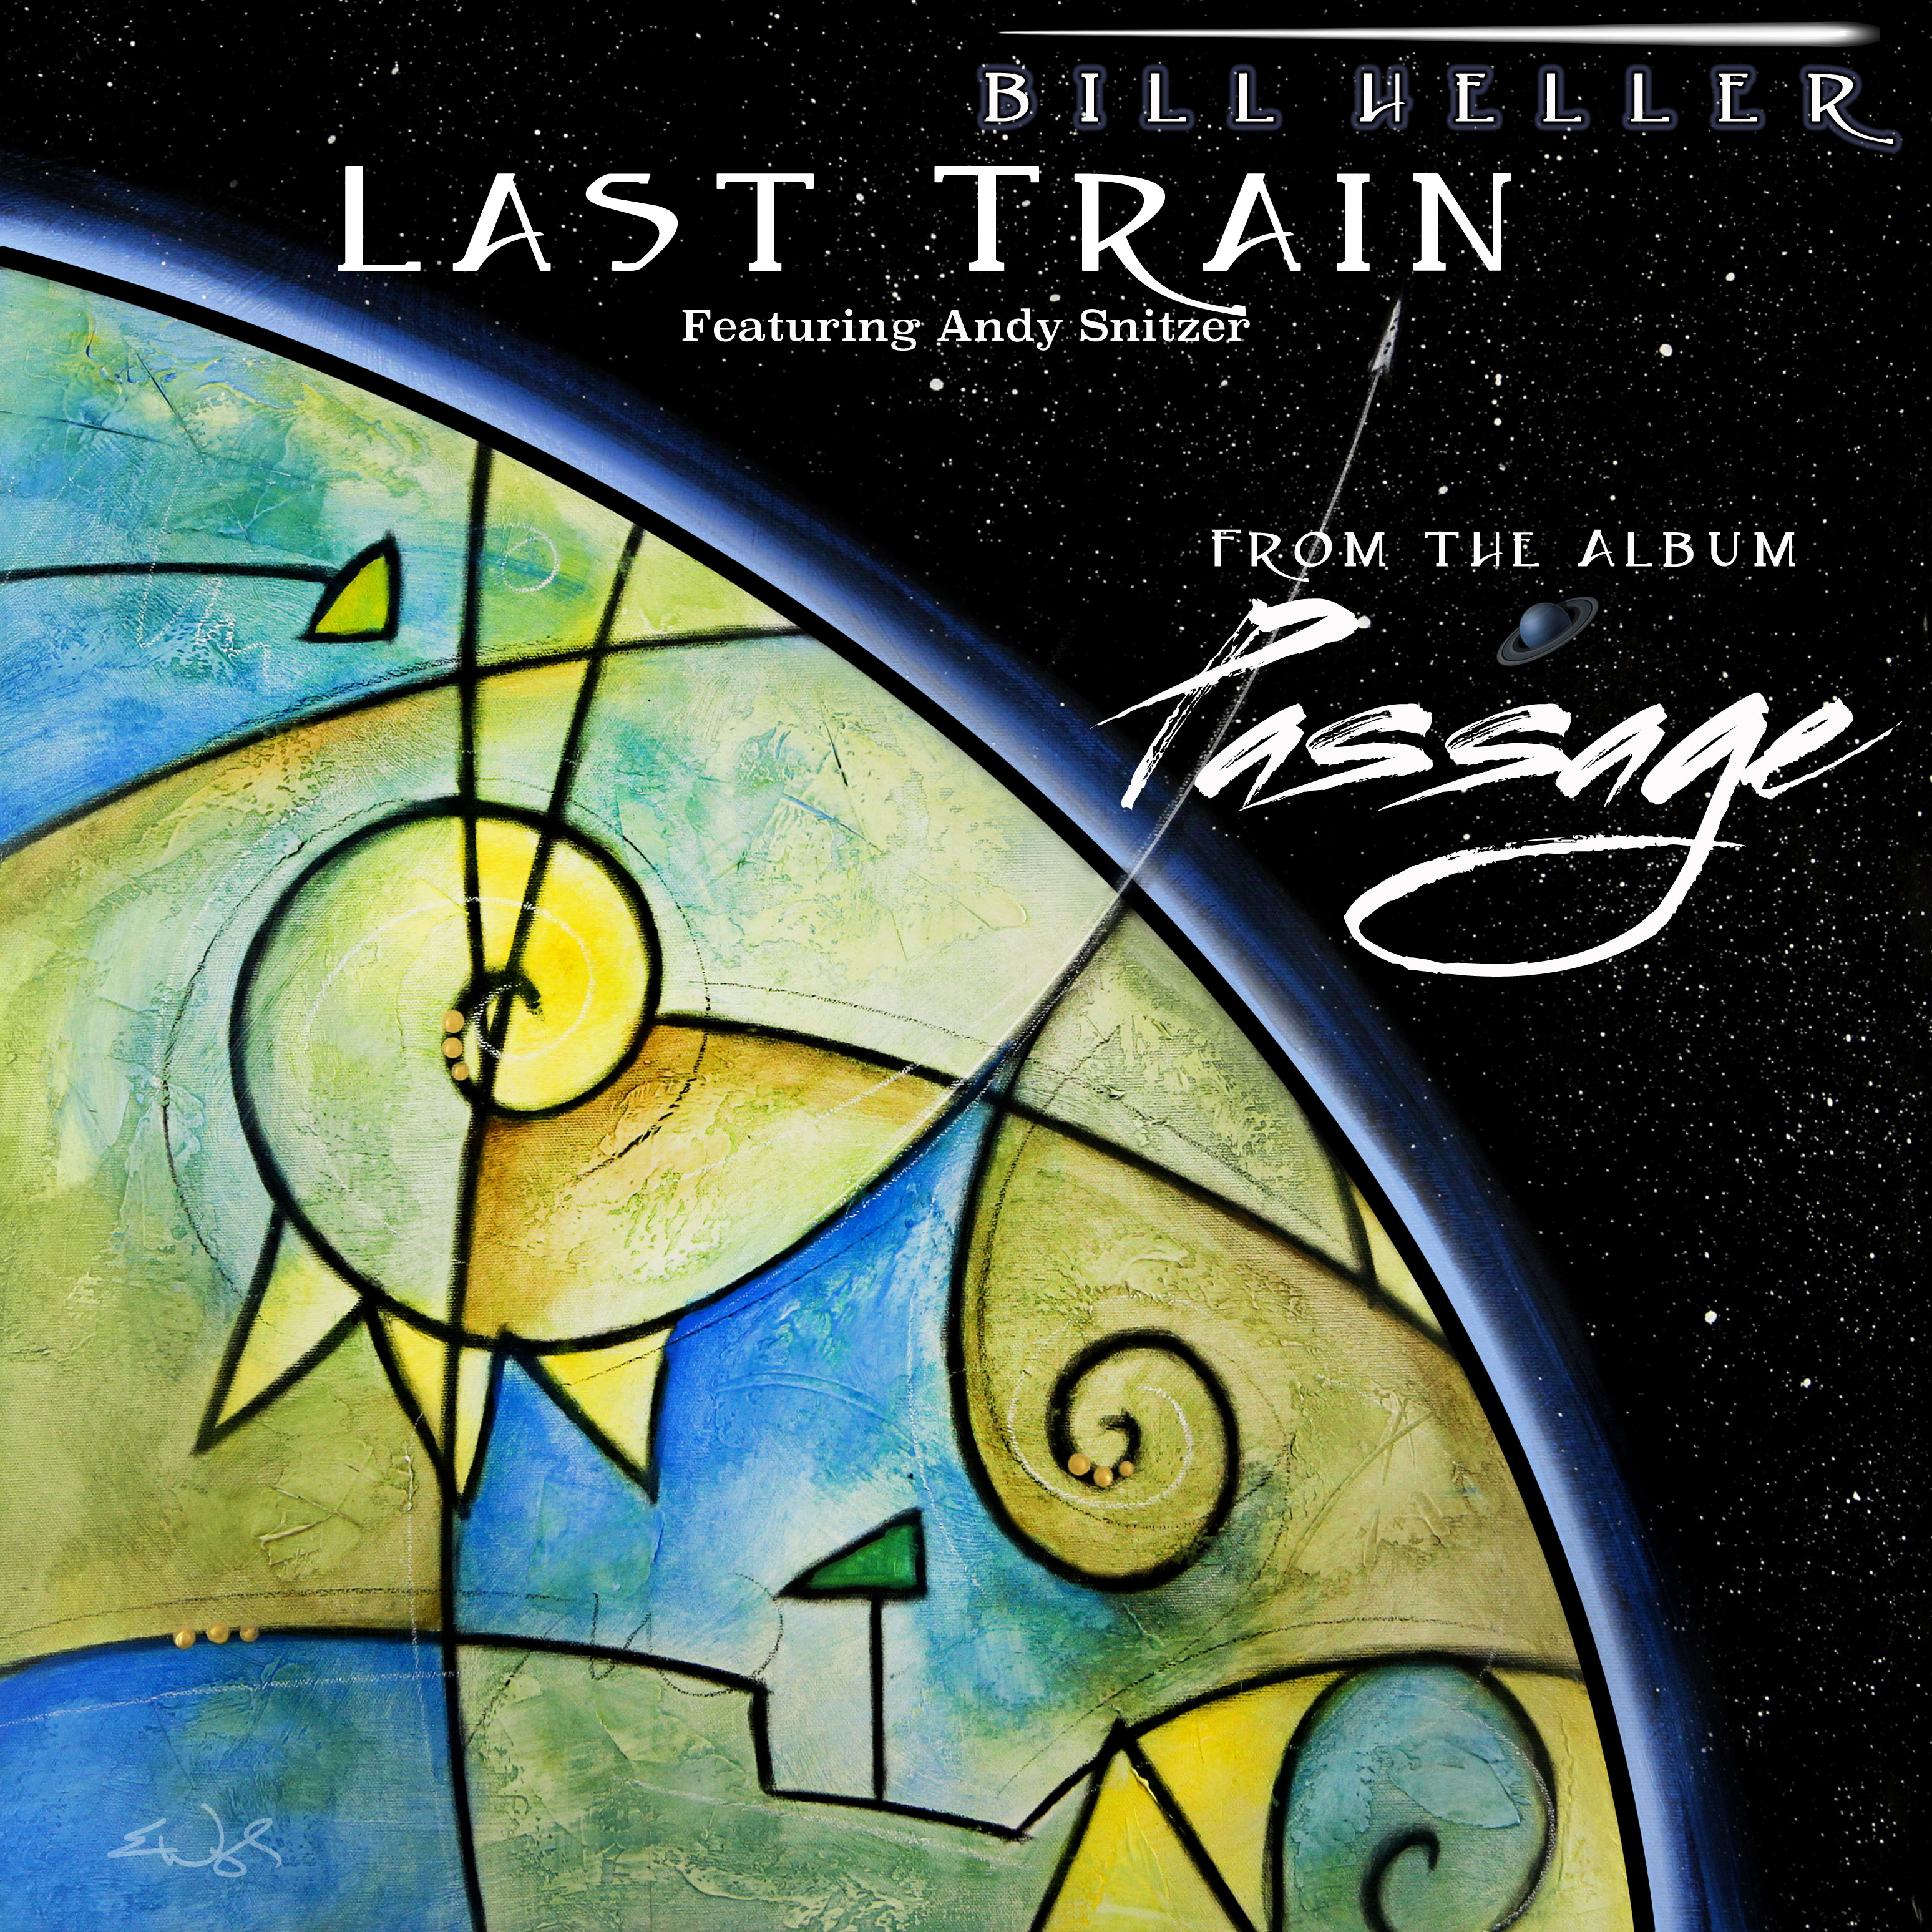 Art for Last Train by Bill Heller featuring Andy Snitzer